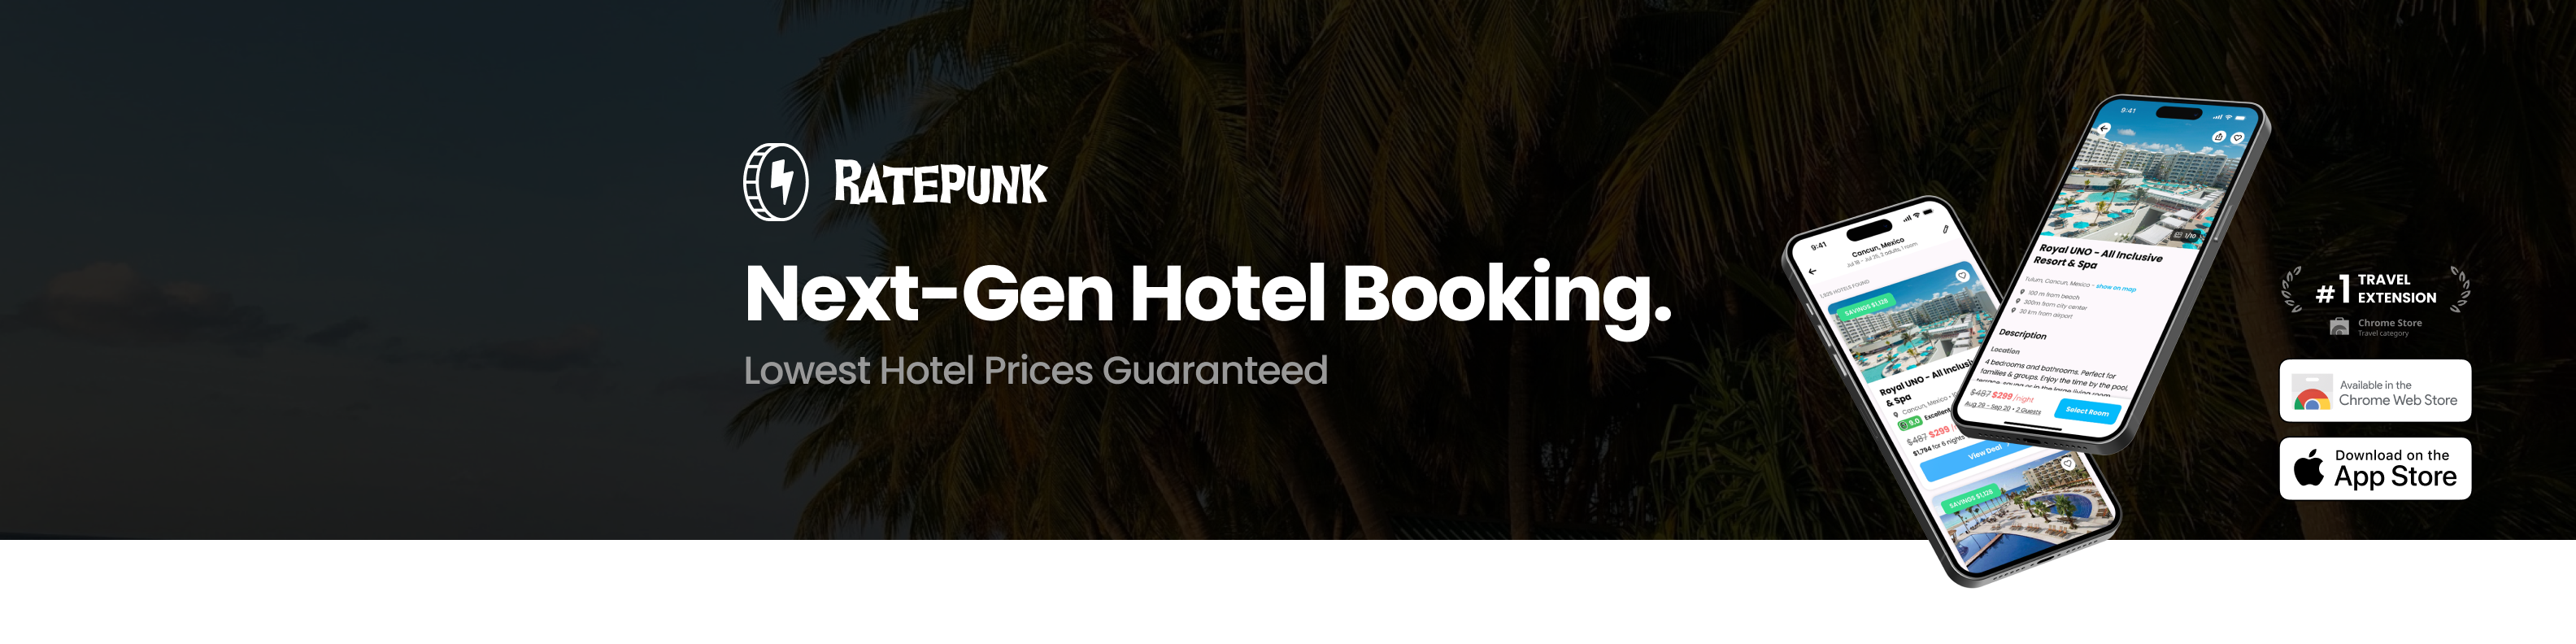 RatePunk- extension and apps - next gen hotel booking - lowest hotel prices guaranteed 